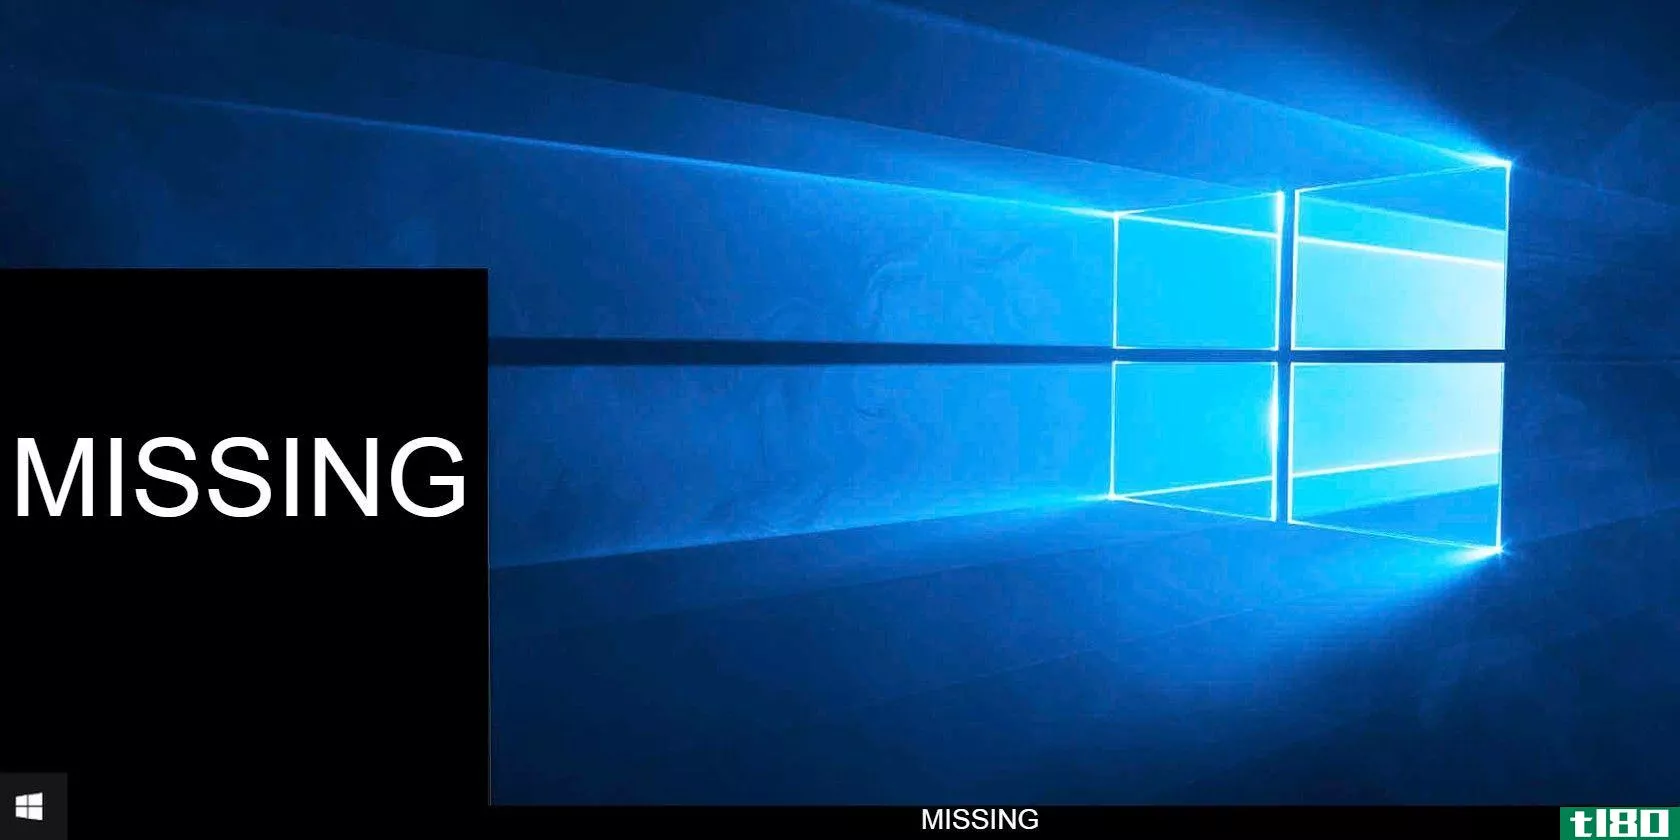 Windows 10 missing features